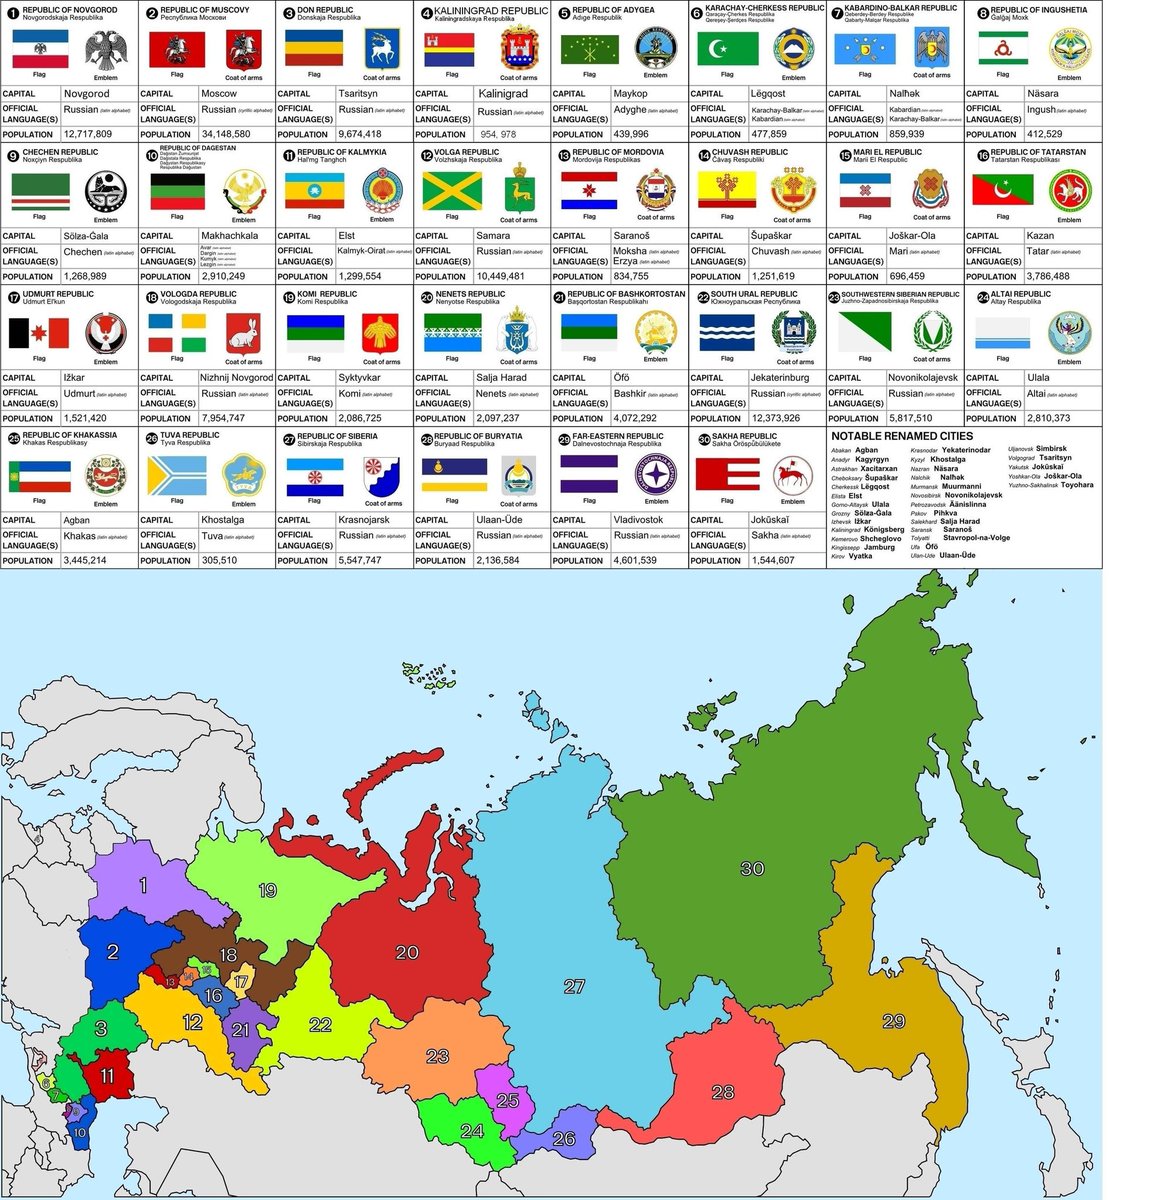 Before becoming part of #Russia, every republic on the map was invaded by Russian barbarians. The Russians brutally slaughtered the peaceful population of these republics and carried out genocide and assimilation of the population. None of the republics joined Russia voluntarily.